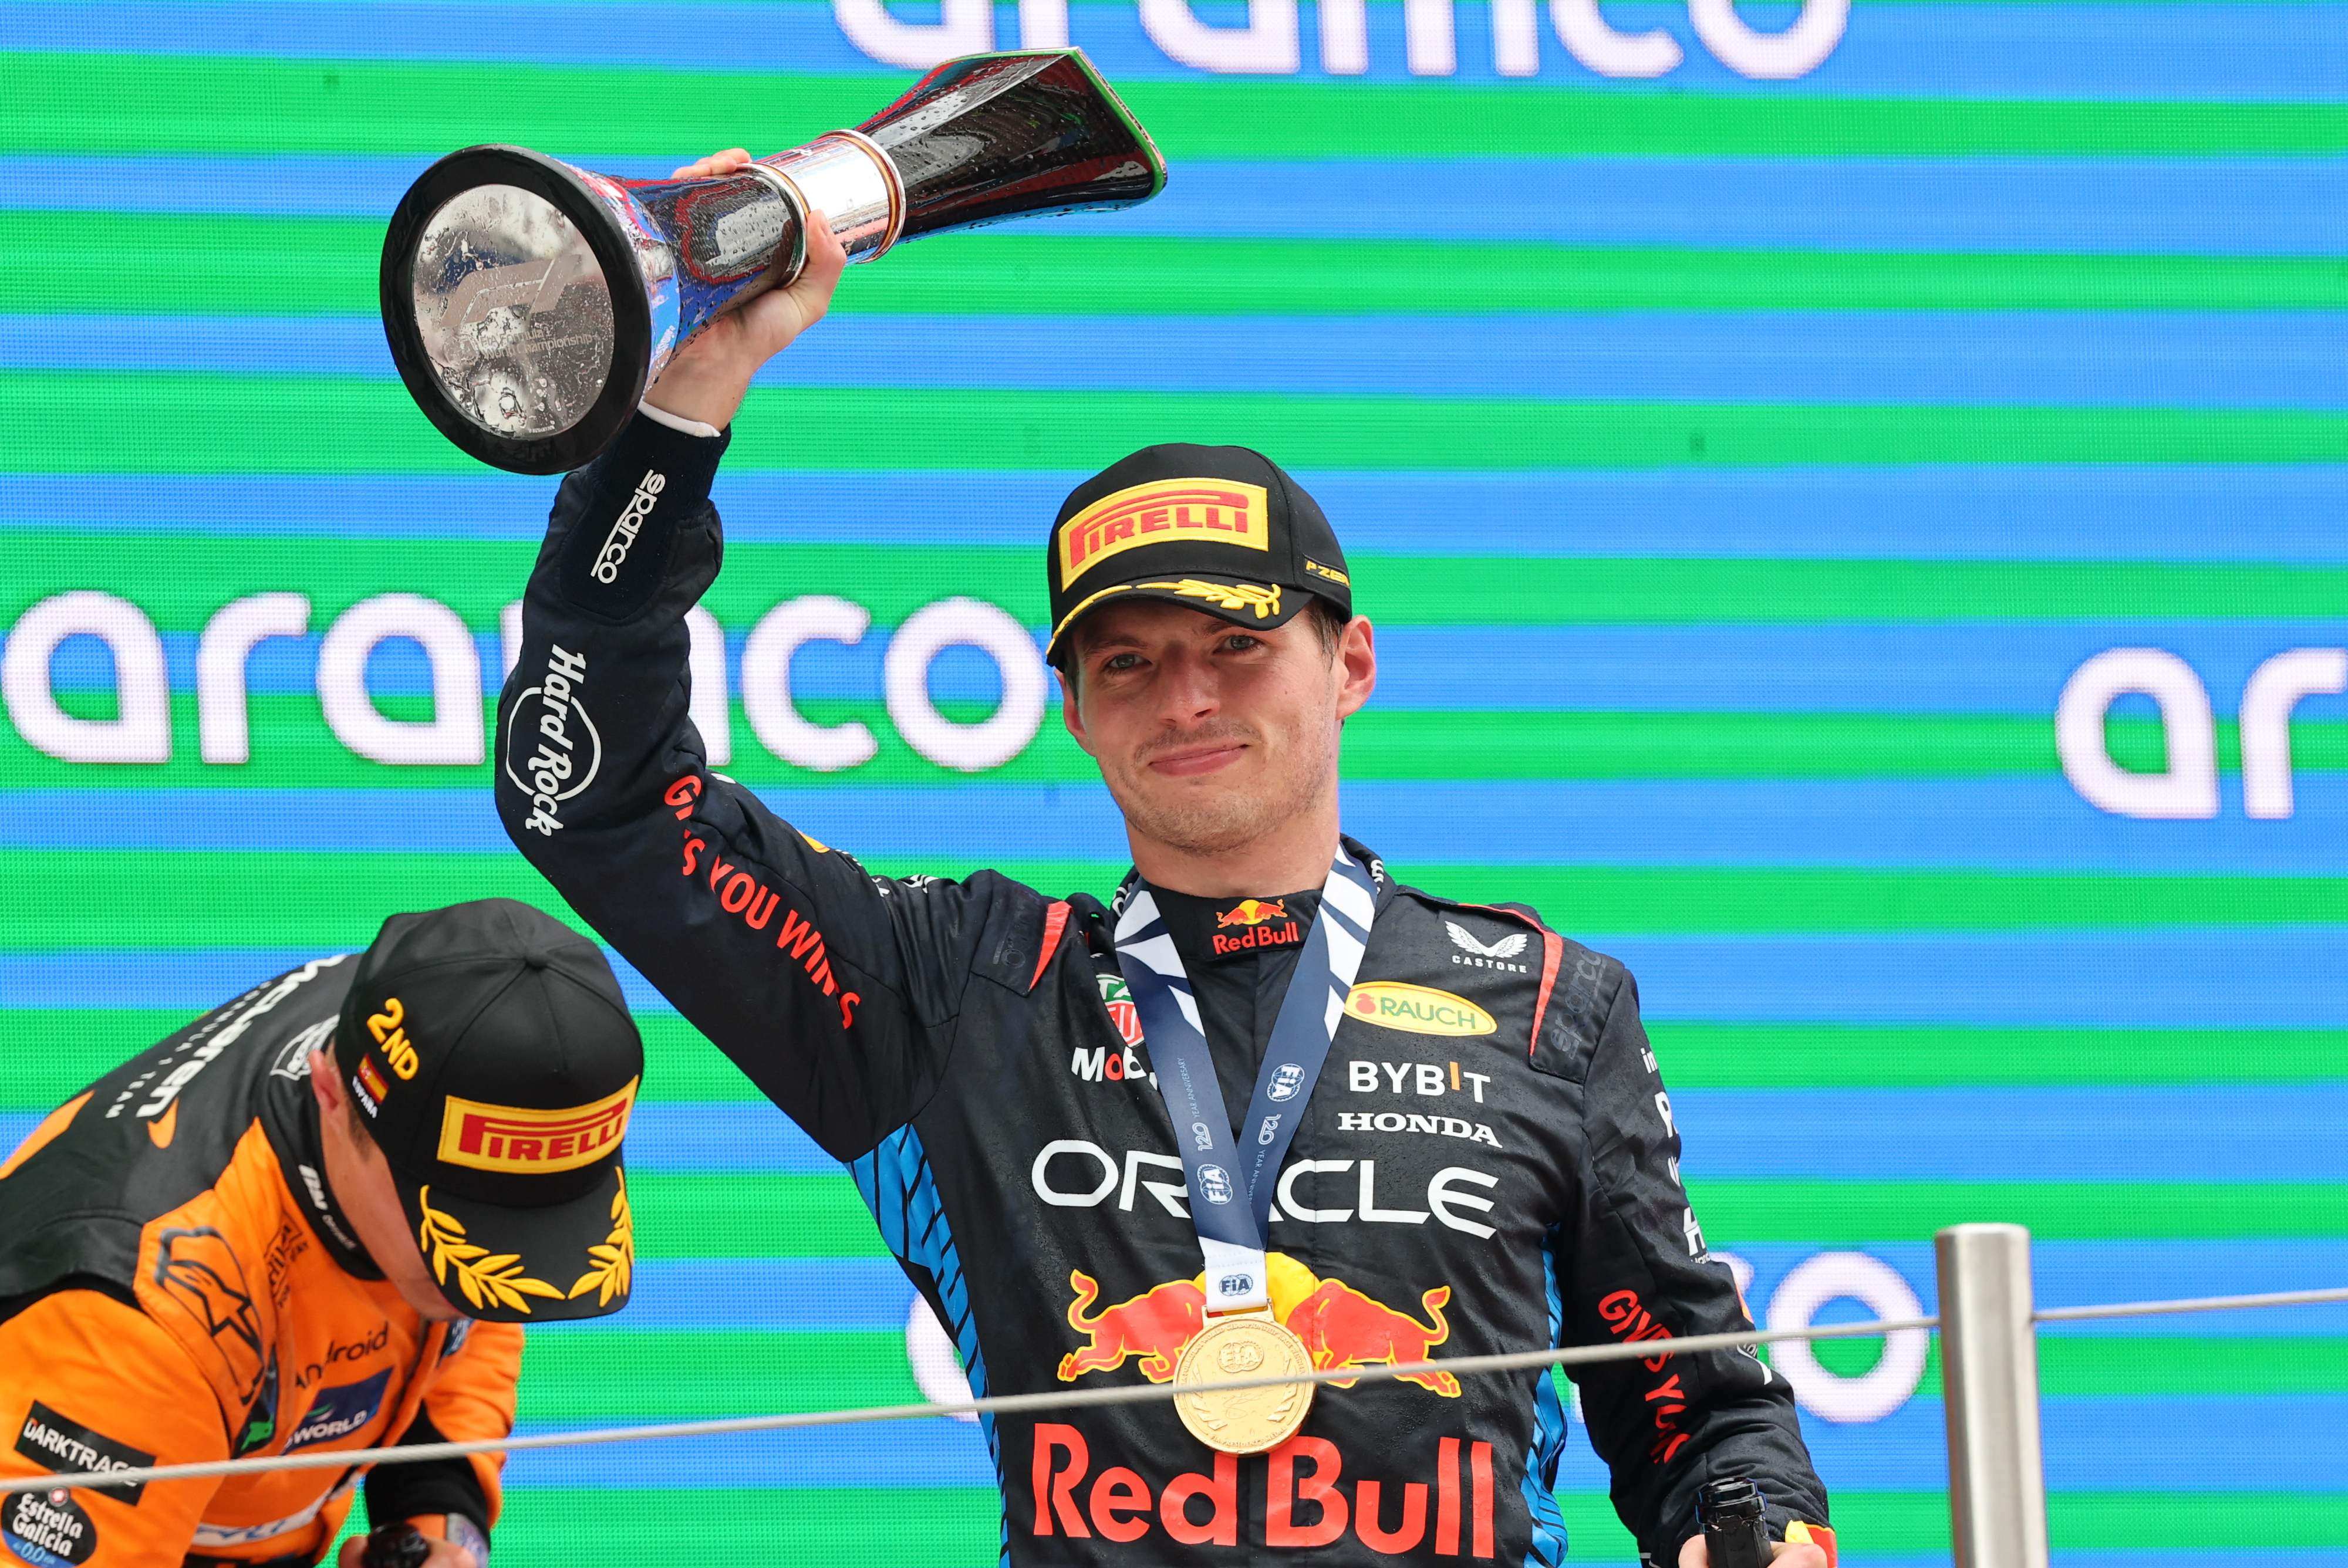 Red Bull’s Dutch driver Max Verstappen celebrates on the podium after winning the Spanish Formula One Grand Prix on Sunday. Photo: AFP